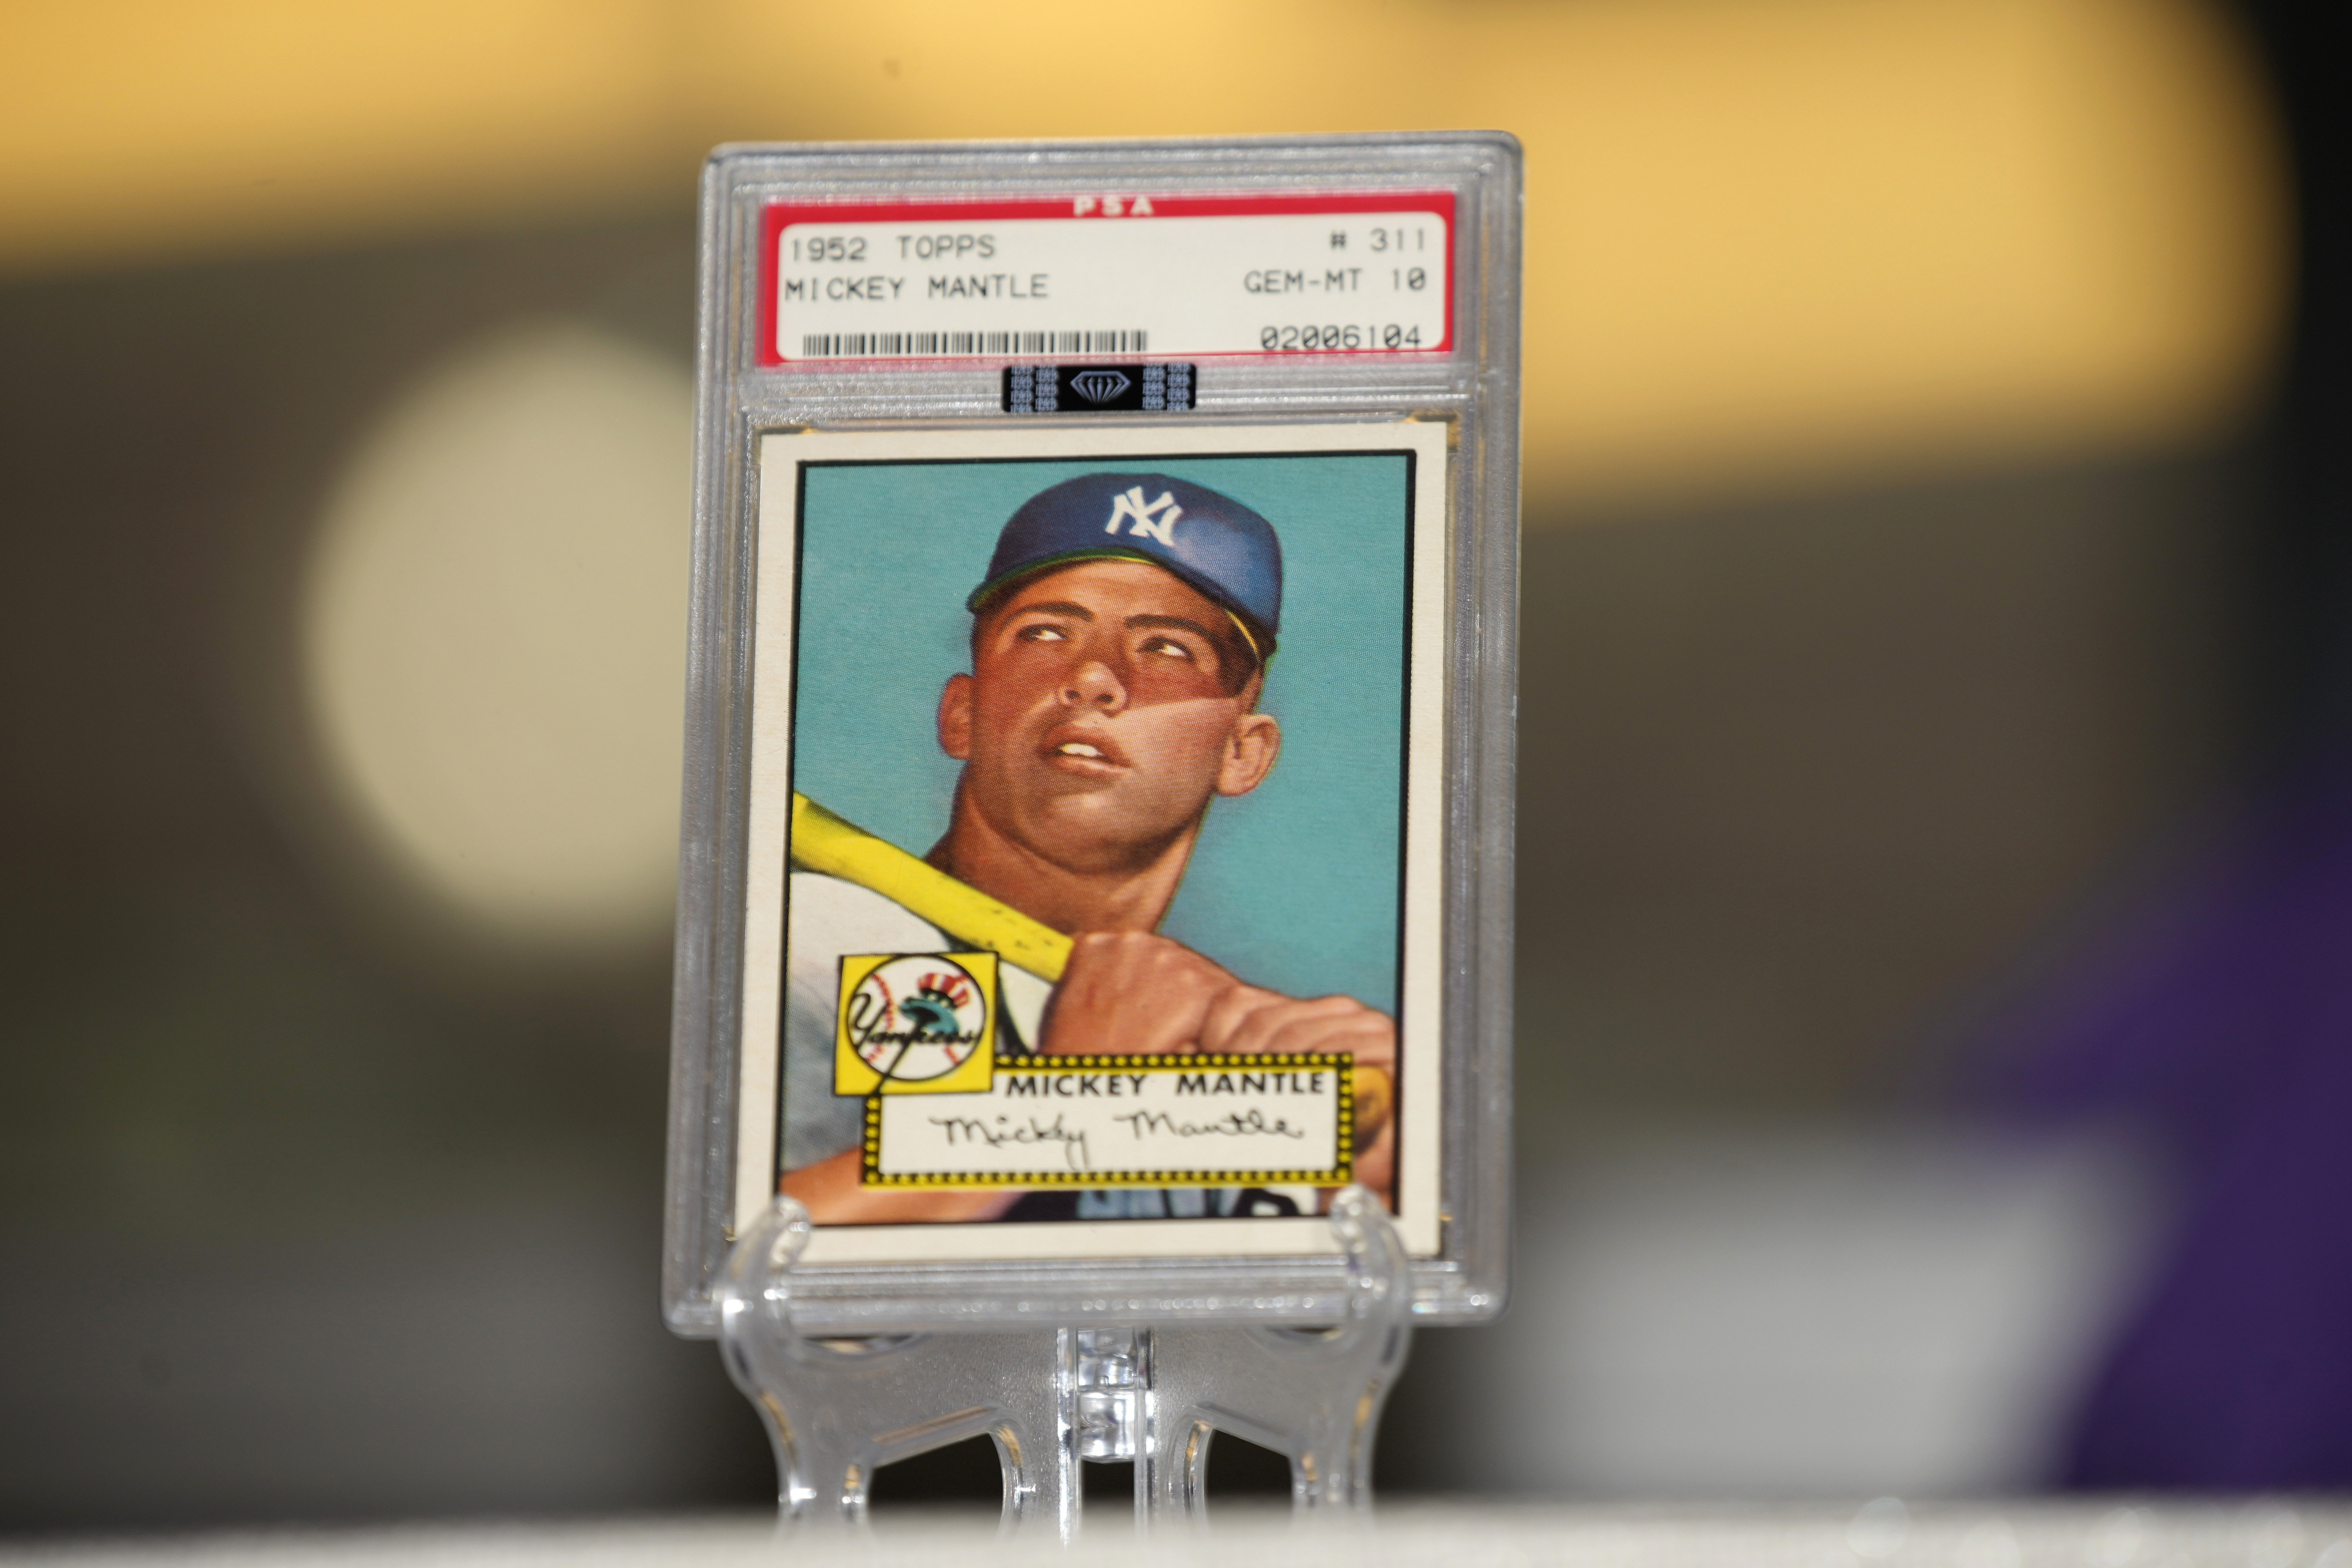 Yankees Legend Mickey Mantle 1952 Topps Card Sells for $2M at Auction, News, Scores, Highlights, Stats, and Rumors